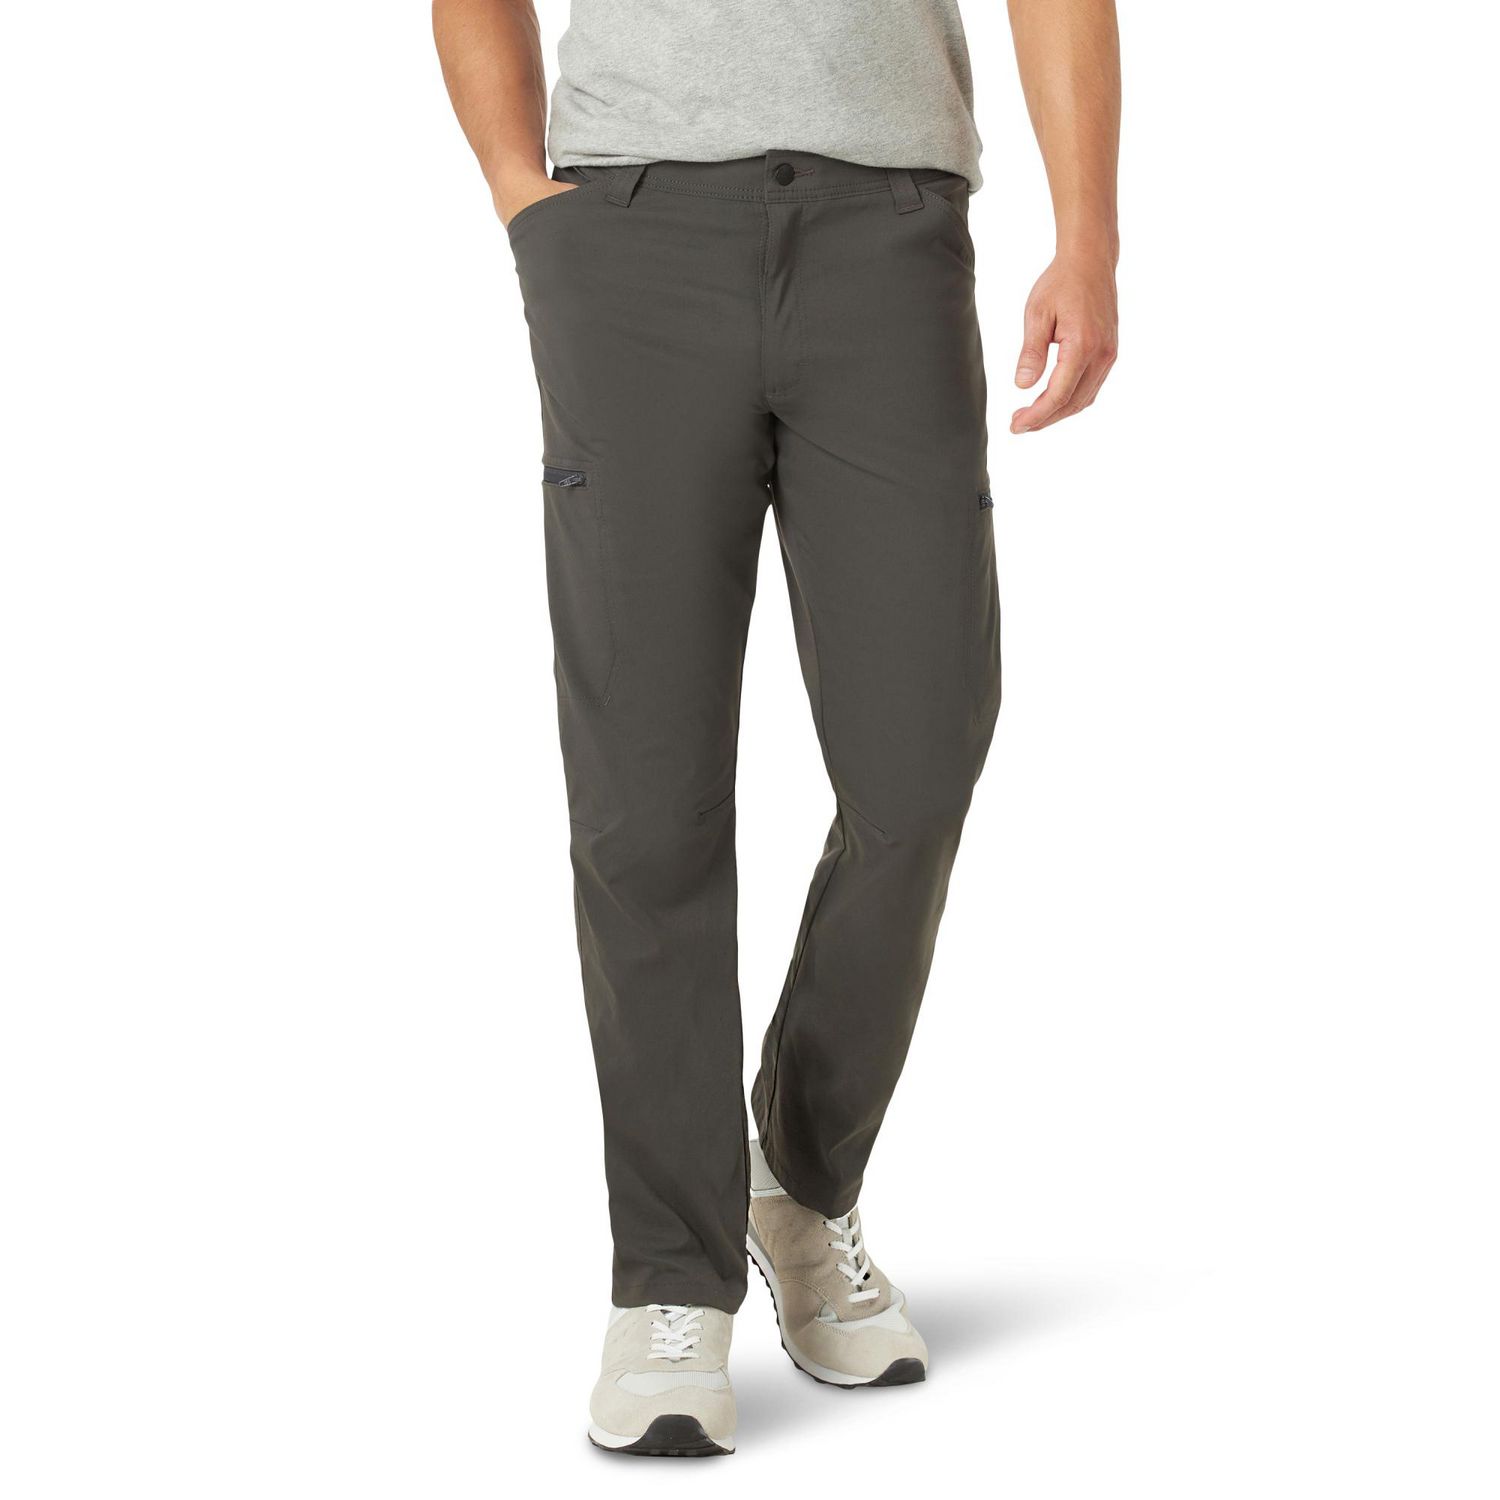 Wrangler Chinos Trousers - Buy Wrangler Chinos Trousers online in India